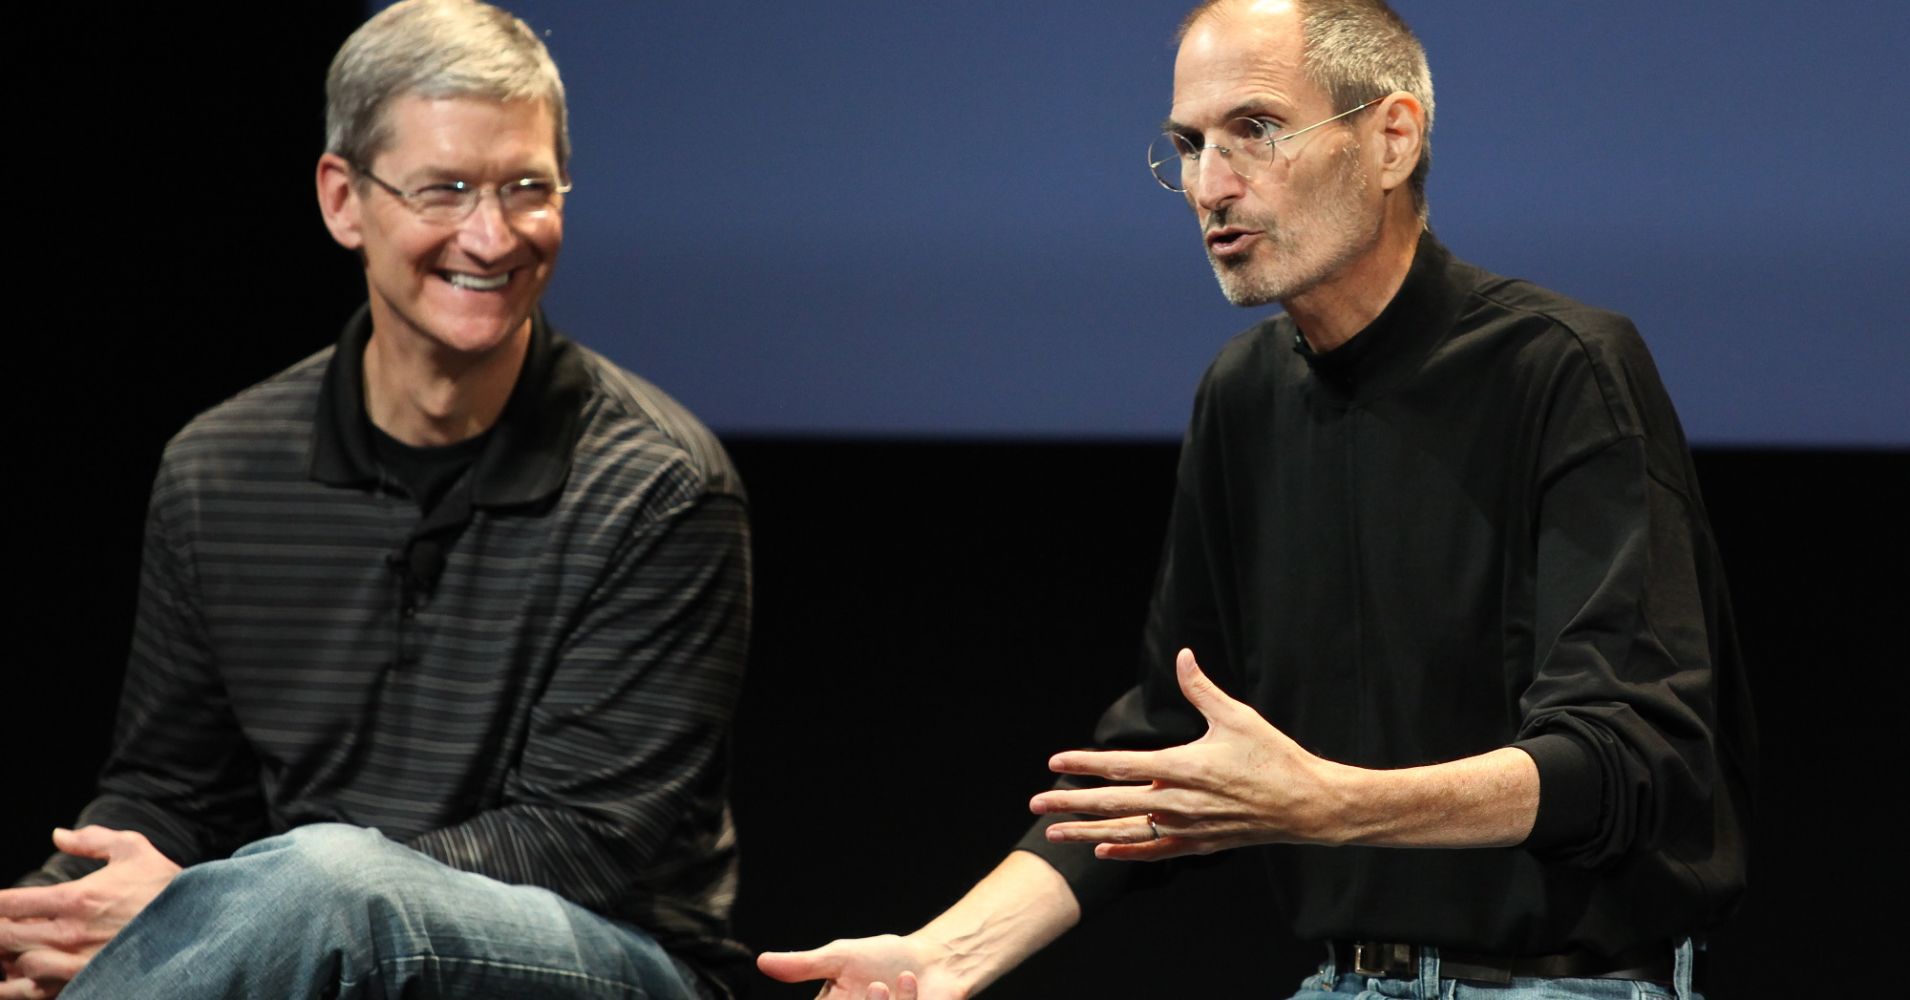 today would have been steve jobs 64th birthday